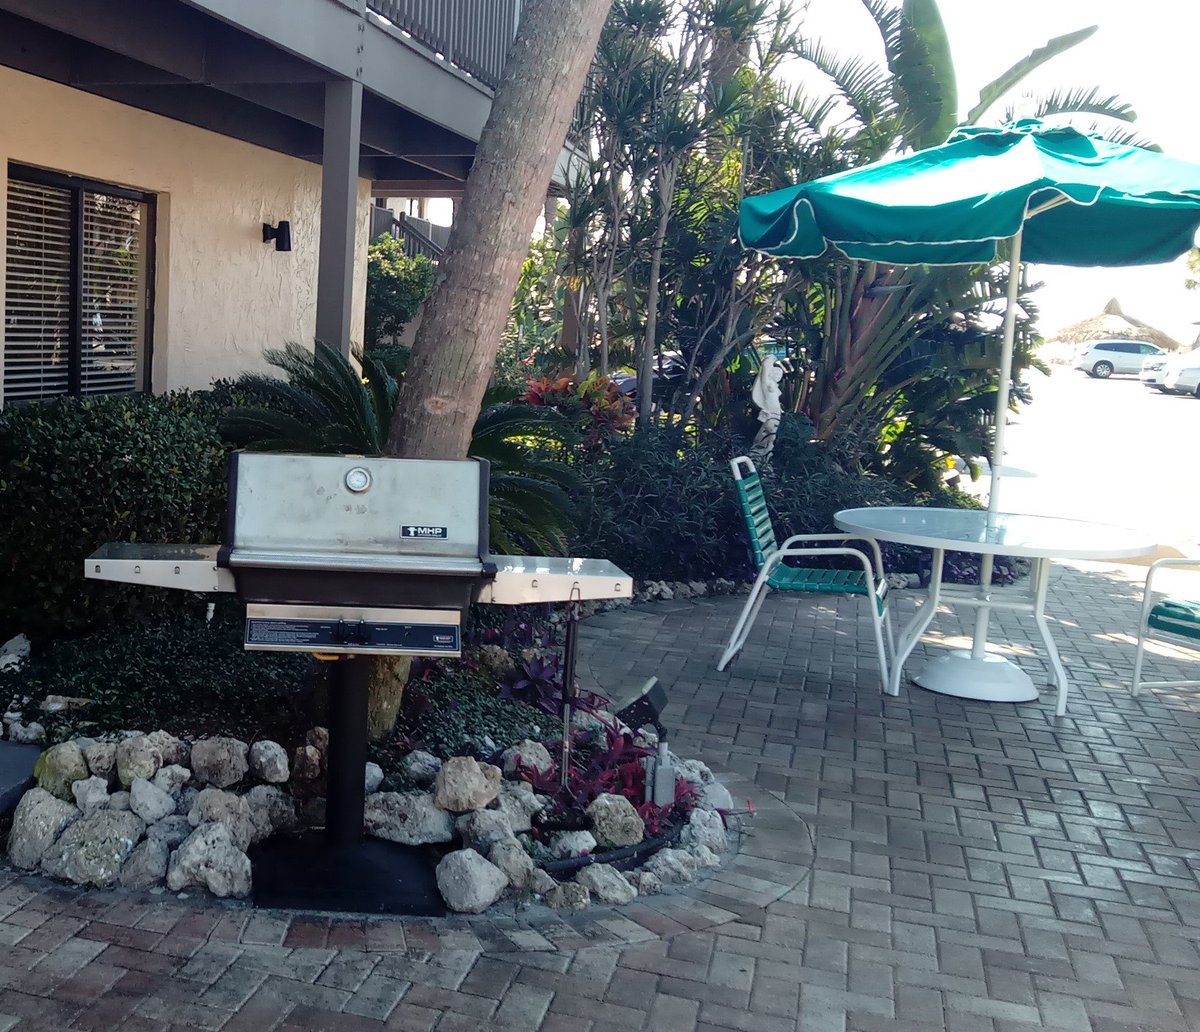 It's a beautiful day to grill out! Suntide has various locations where you can gather and have family picnic! #grillinandchillin #suntideislandbeachclub #grills #picnicareas #salttherapy #relax